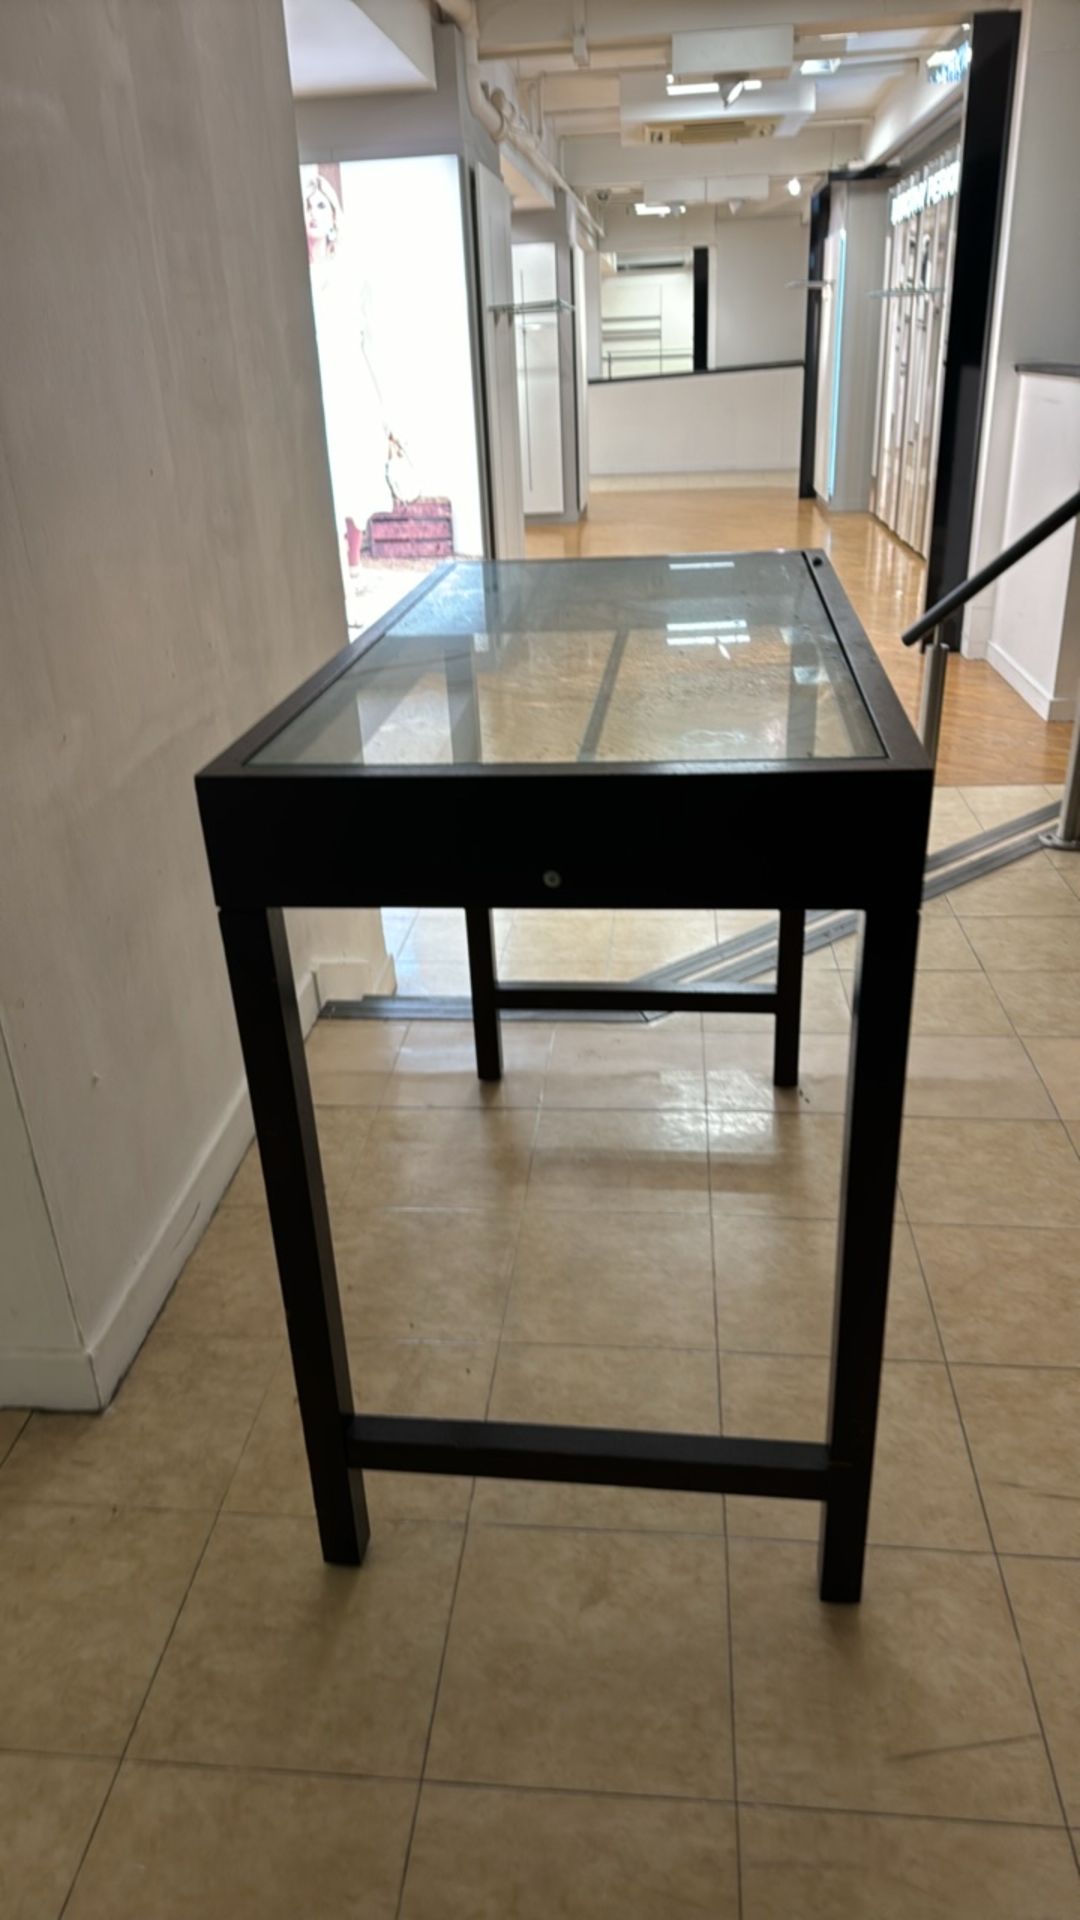 Wooden Table With Glass Top - Image 4 of 4